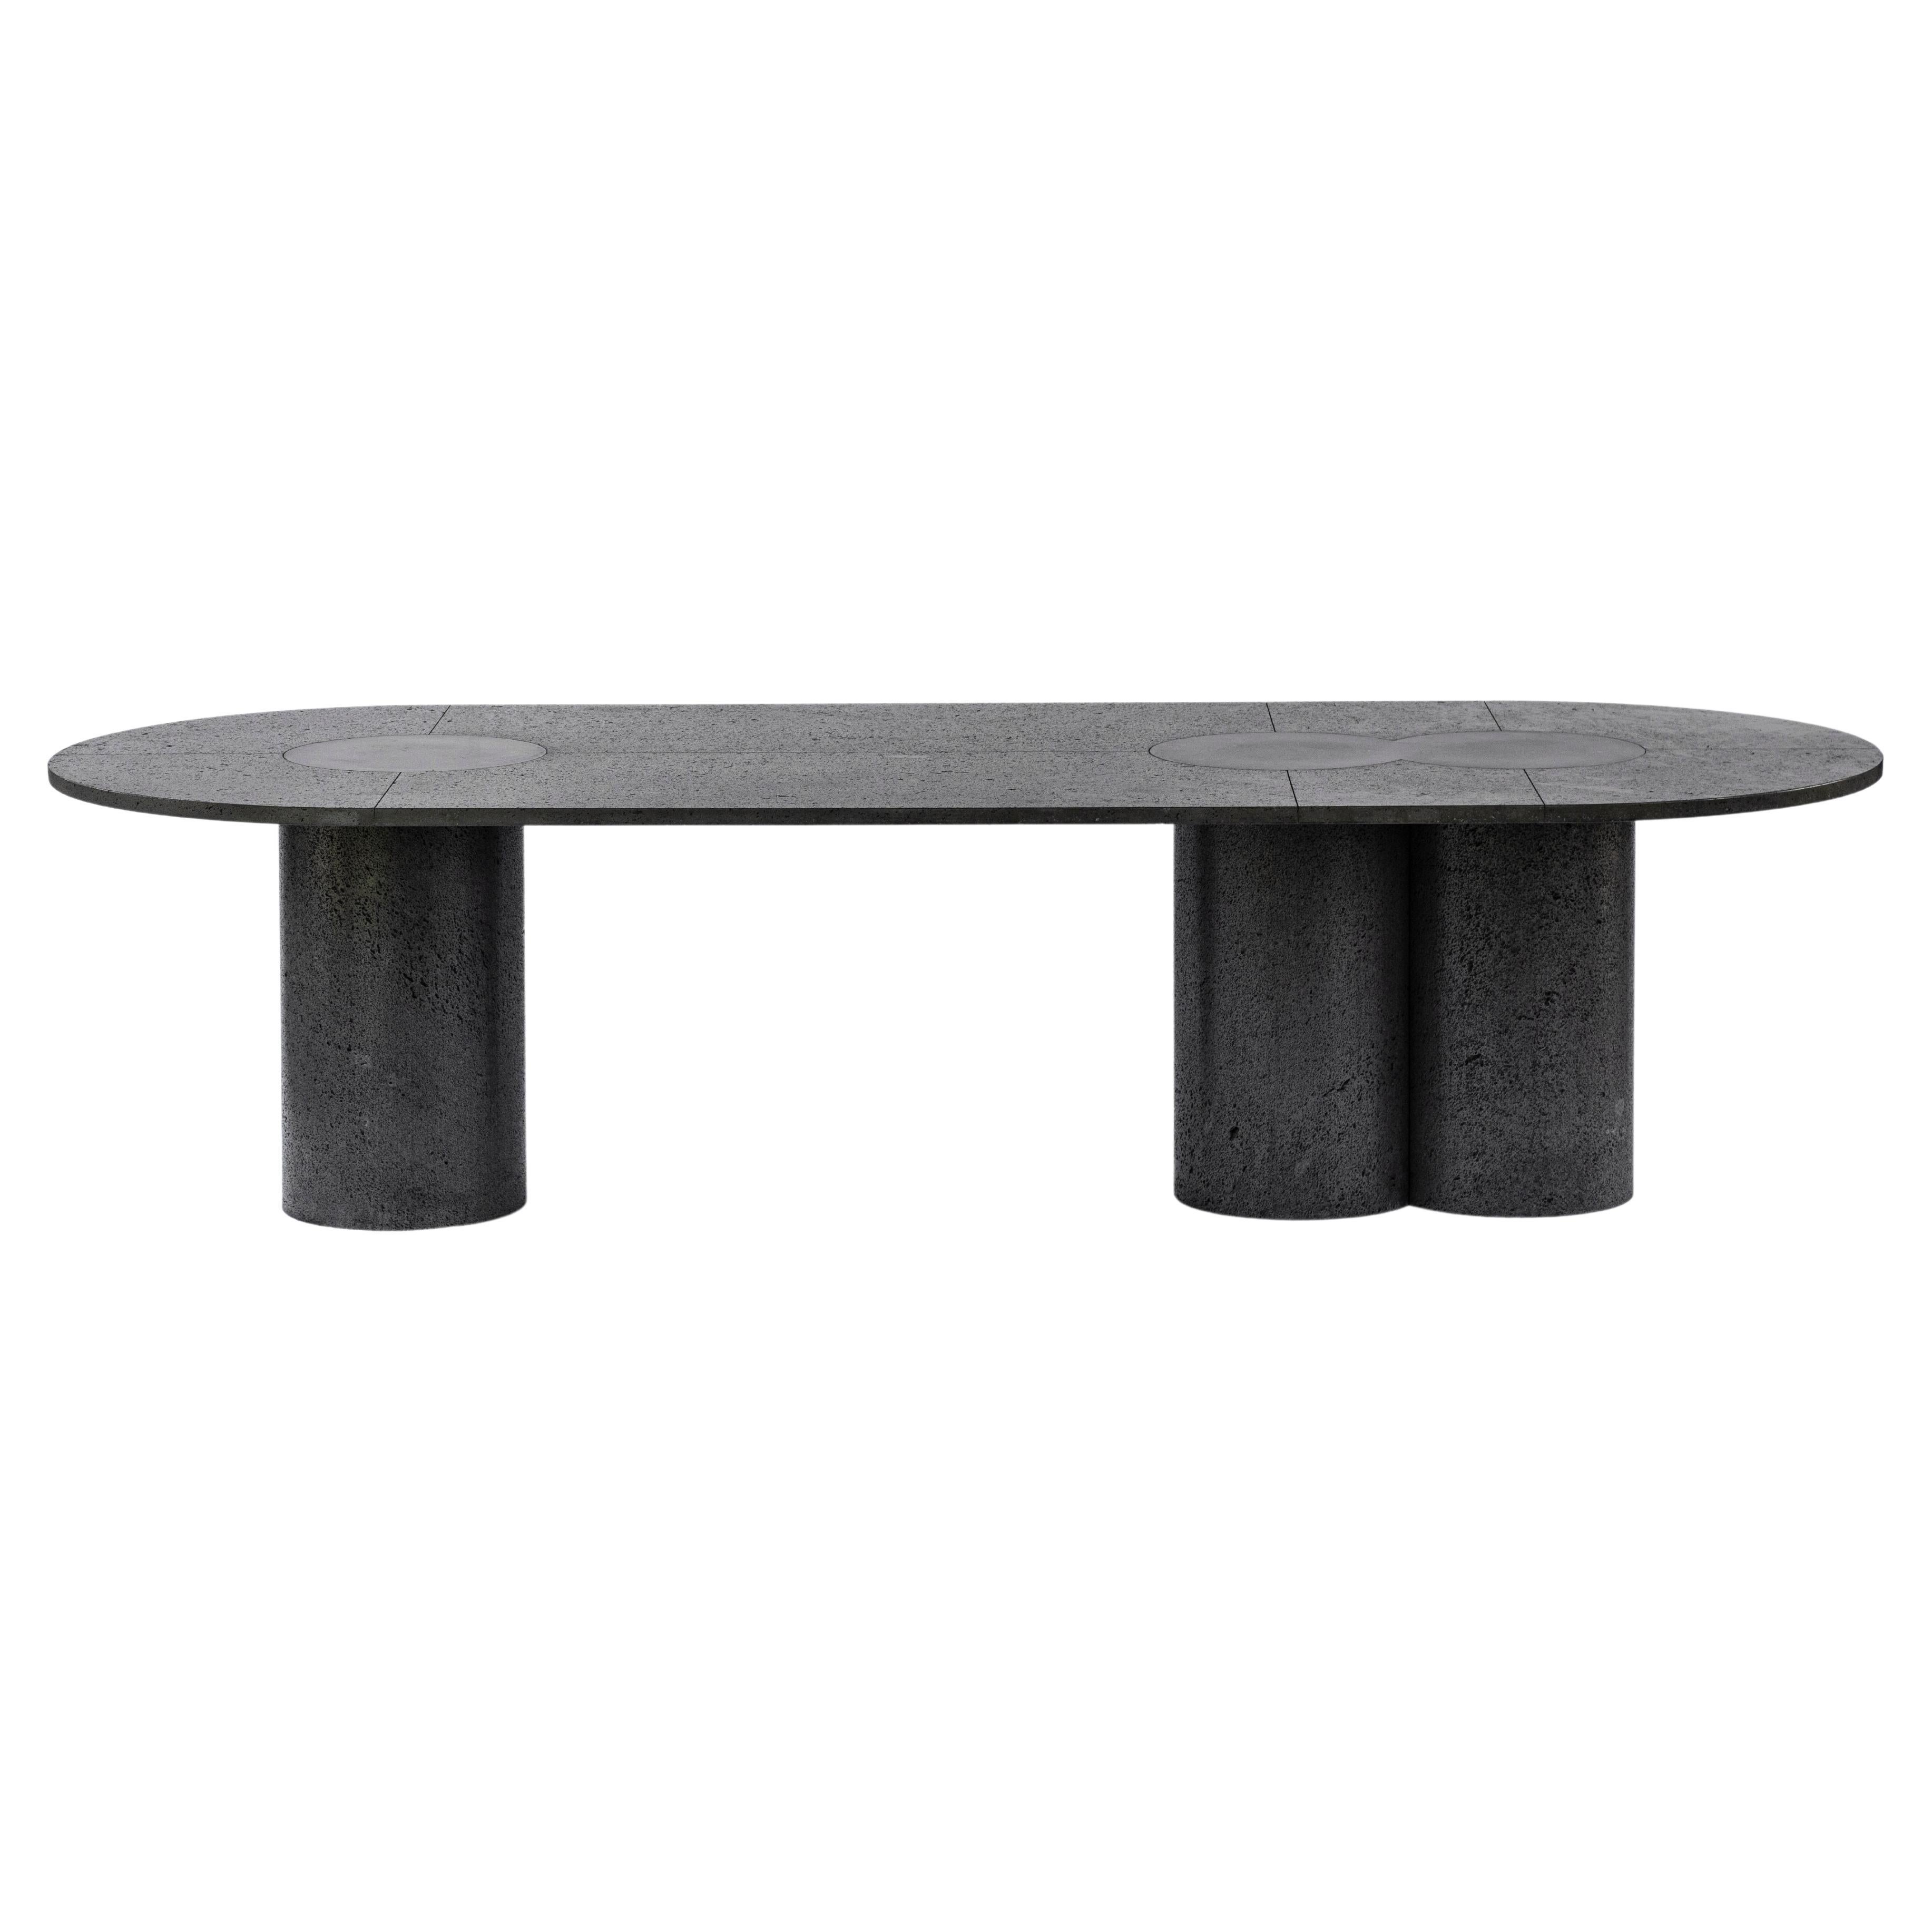 North American Tables